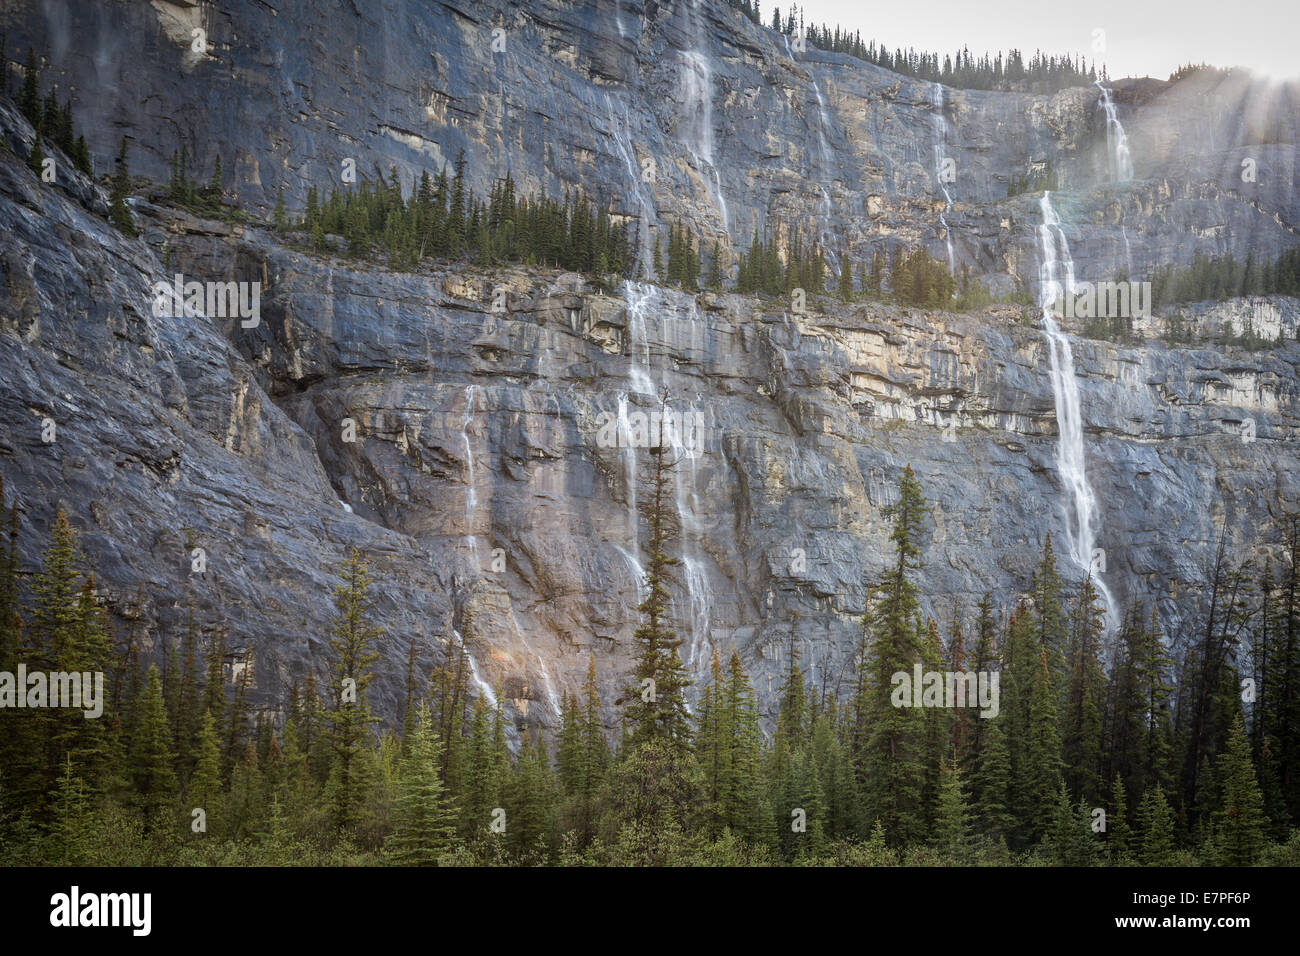 Weeping Wall, Icefields Parkway, Banff National Park, Alberta, Canada, North America. Stock Photo